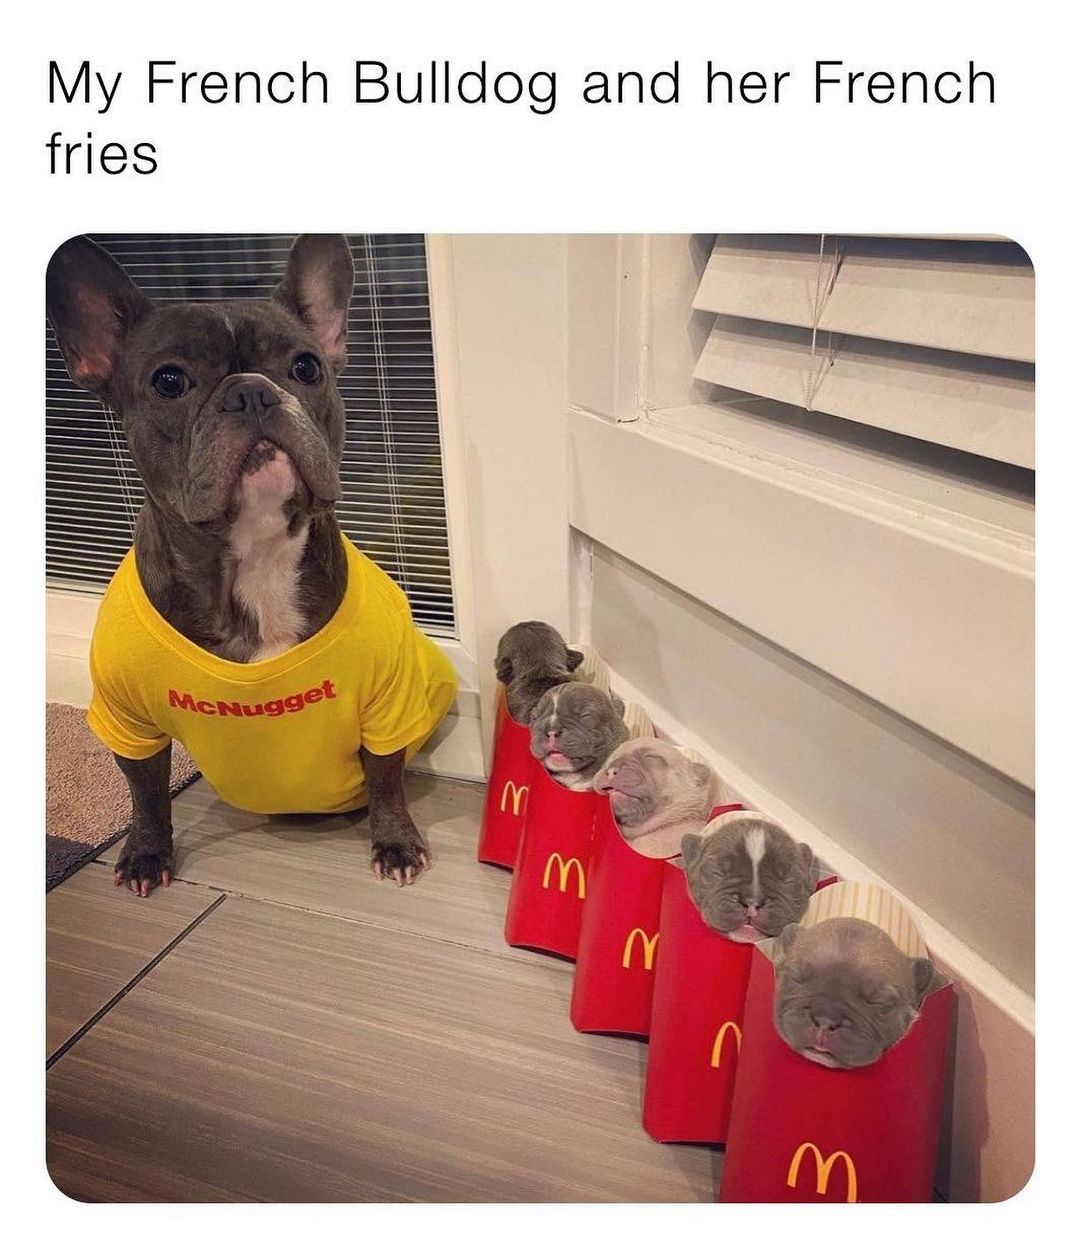 My French Bulldog and her French fries.